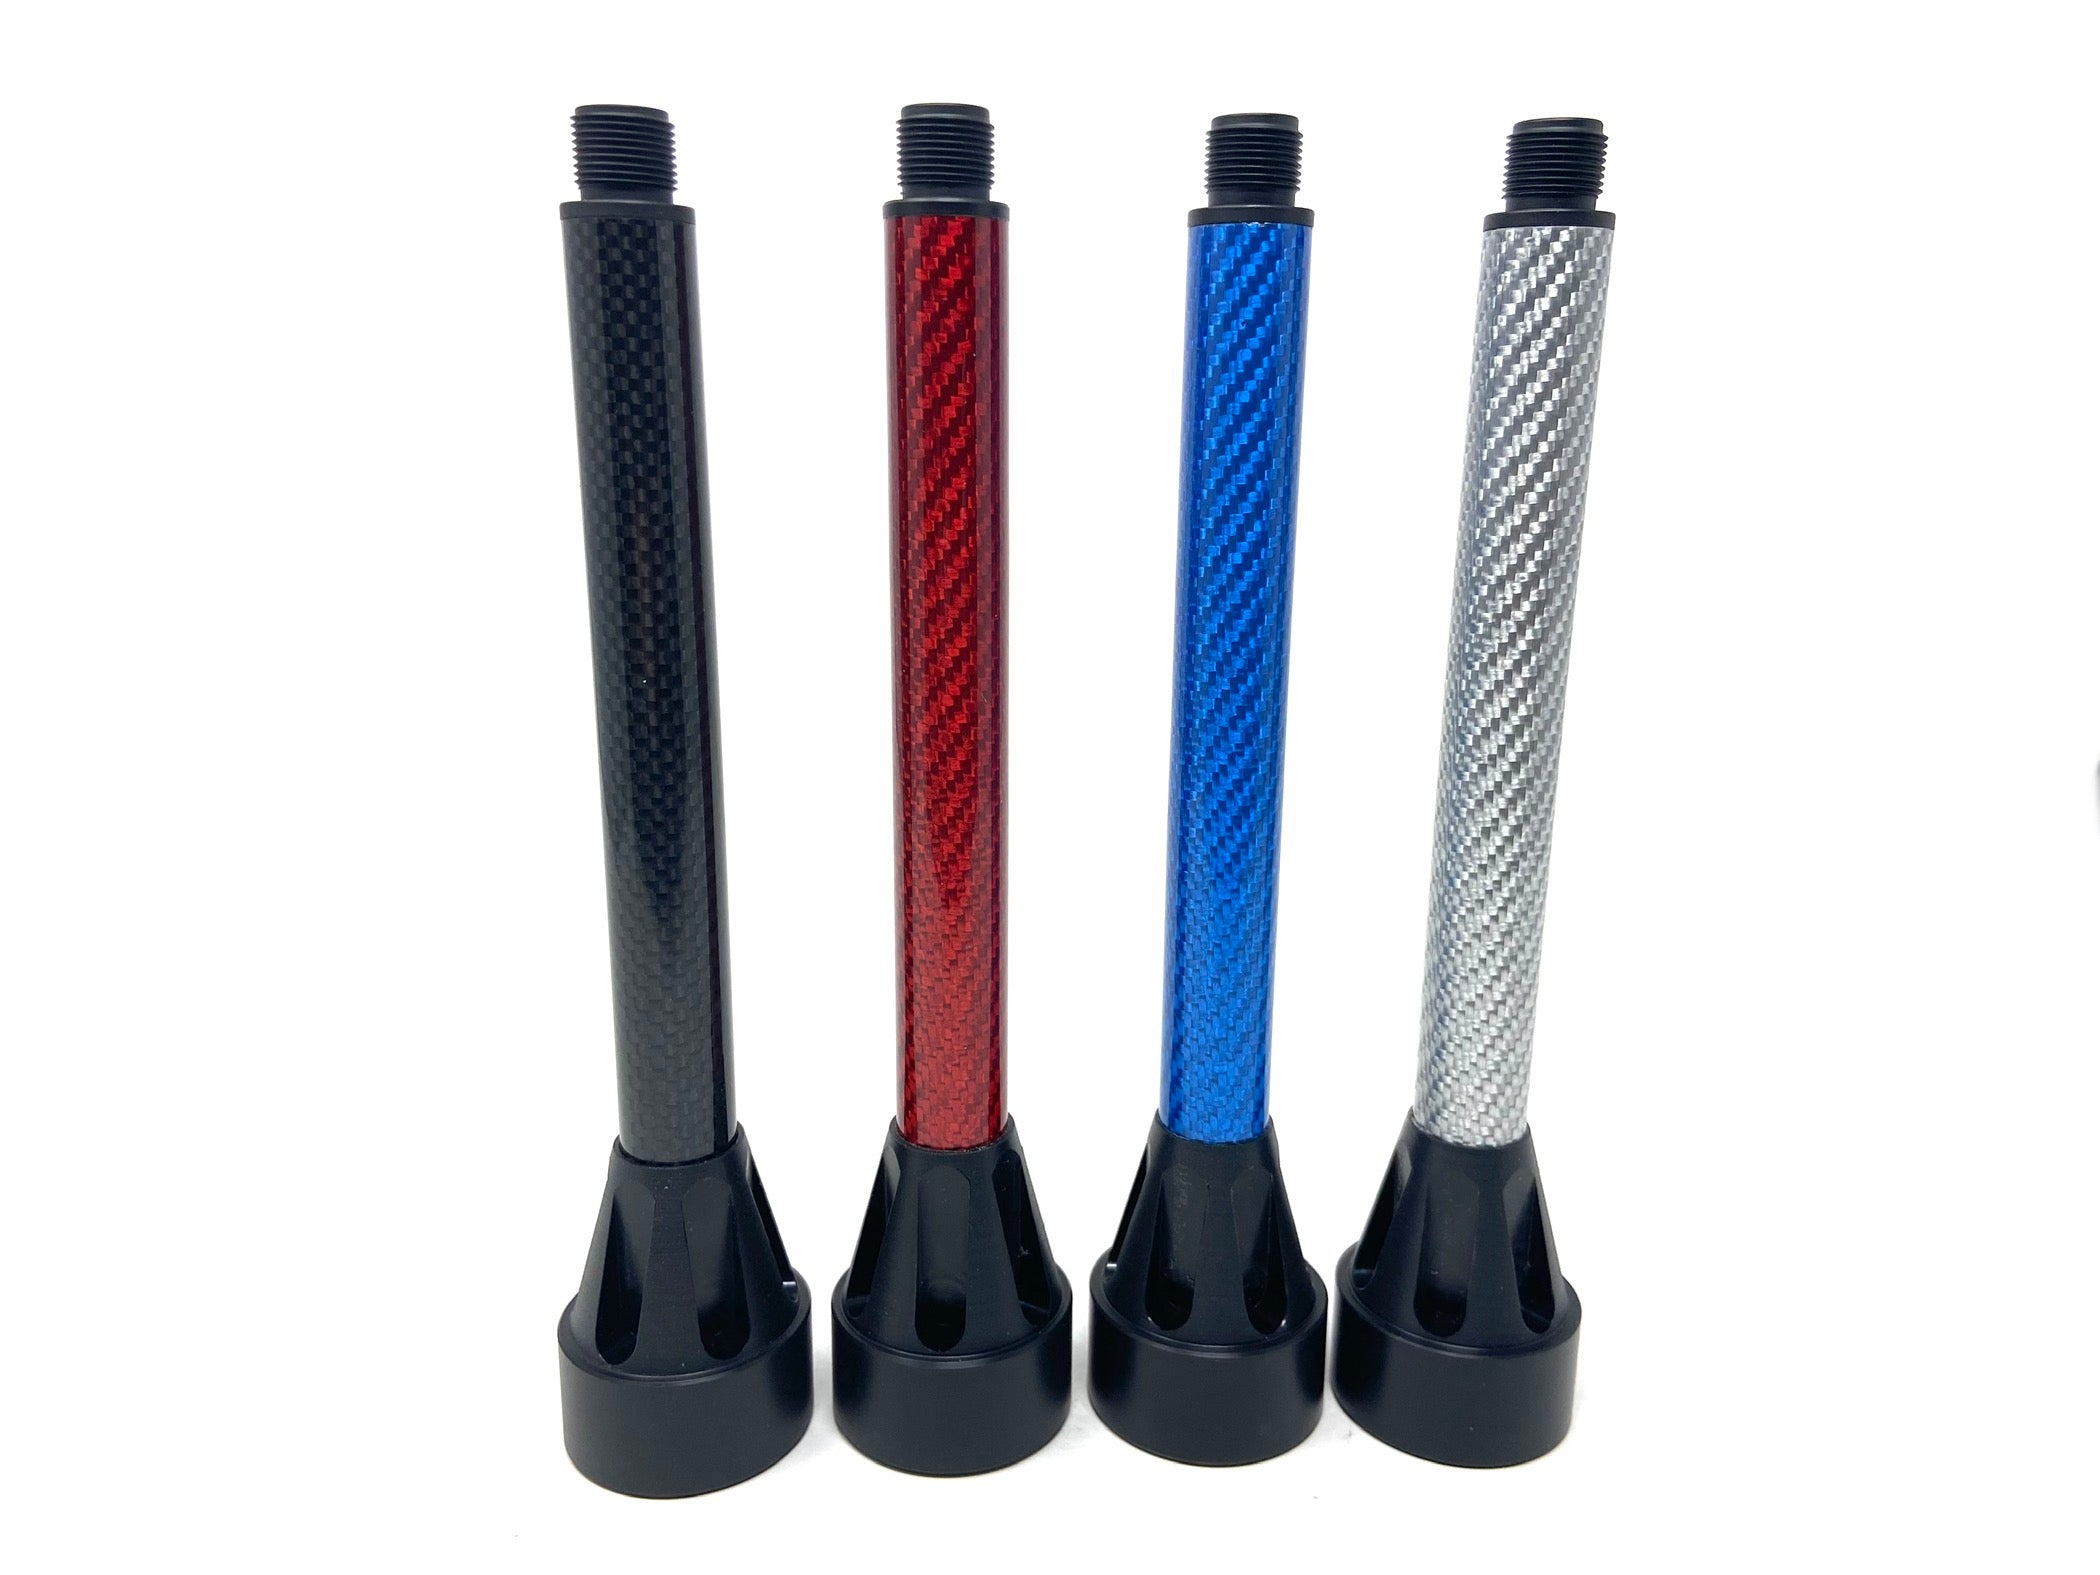 MAC Airsoft Easy Cannon Outer barrel 8" Blue - ssairsoft.com